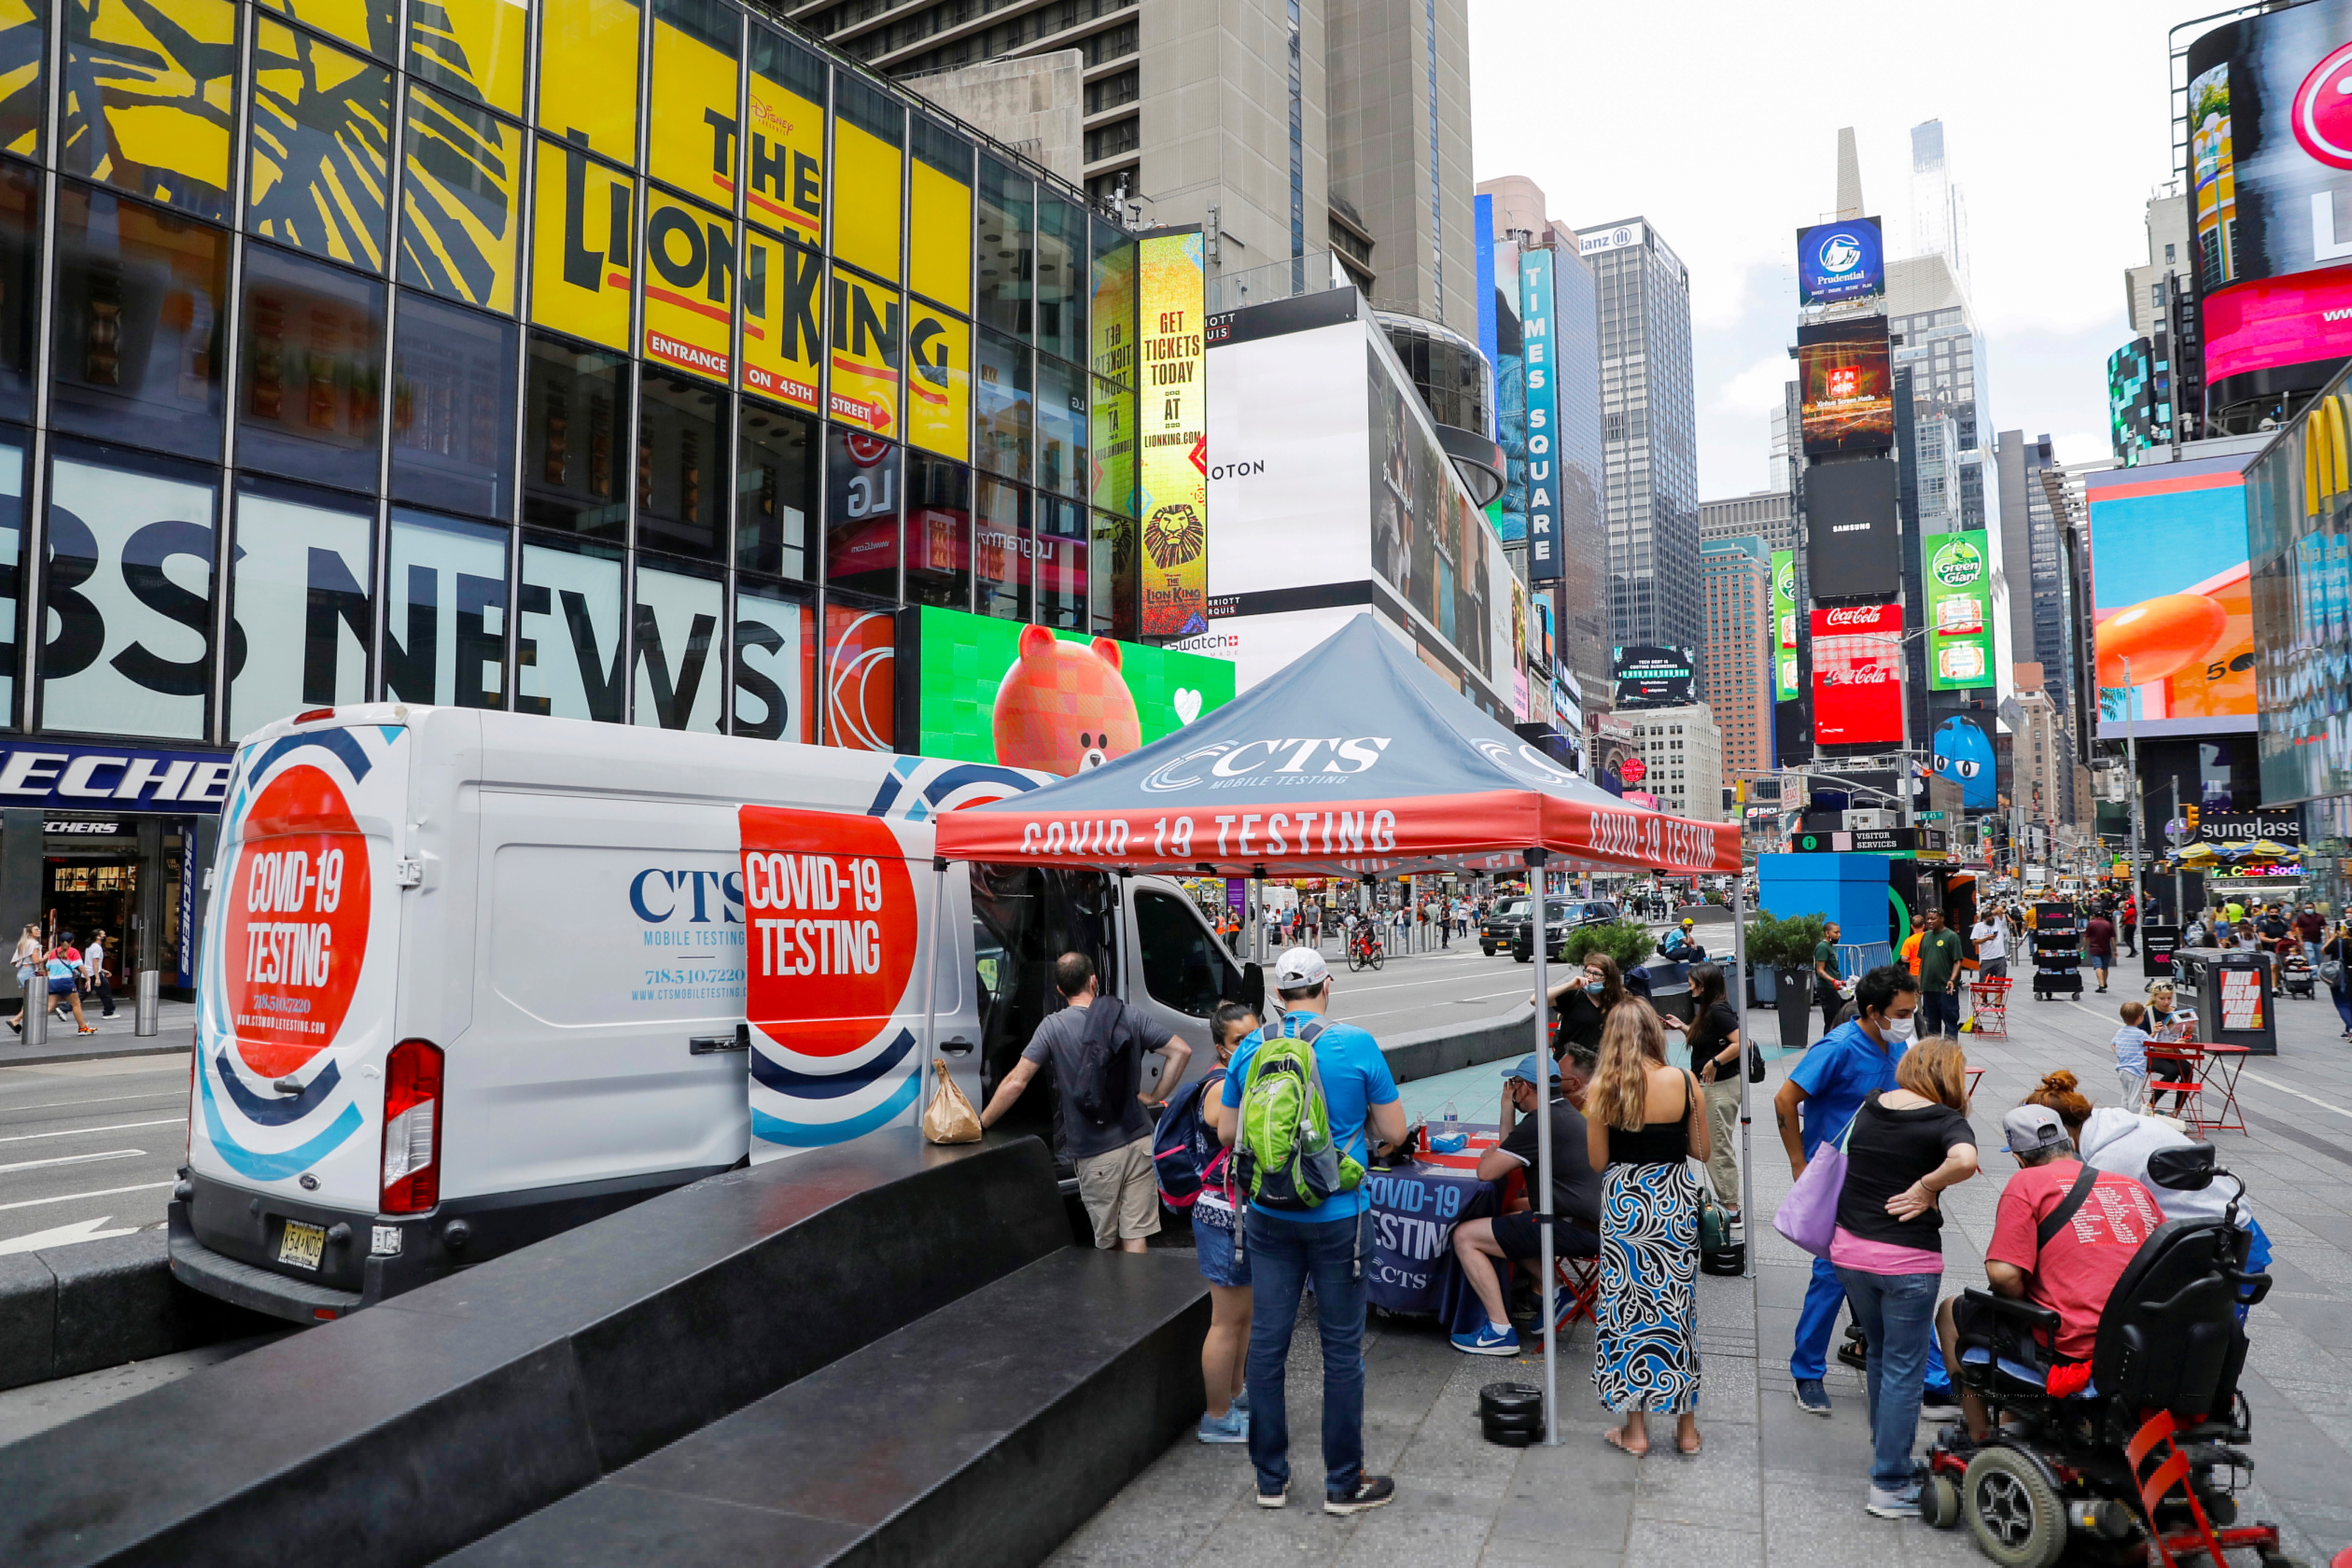 A pop-up testing site in Times Square in New York as cases continue to surge in the US. Photo: Reuters